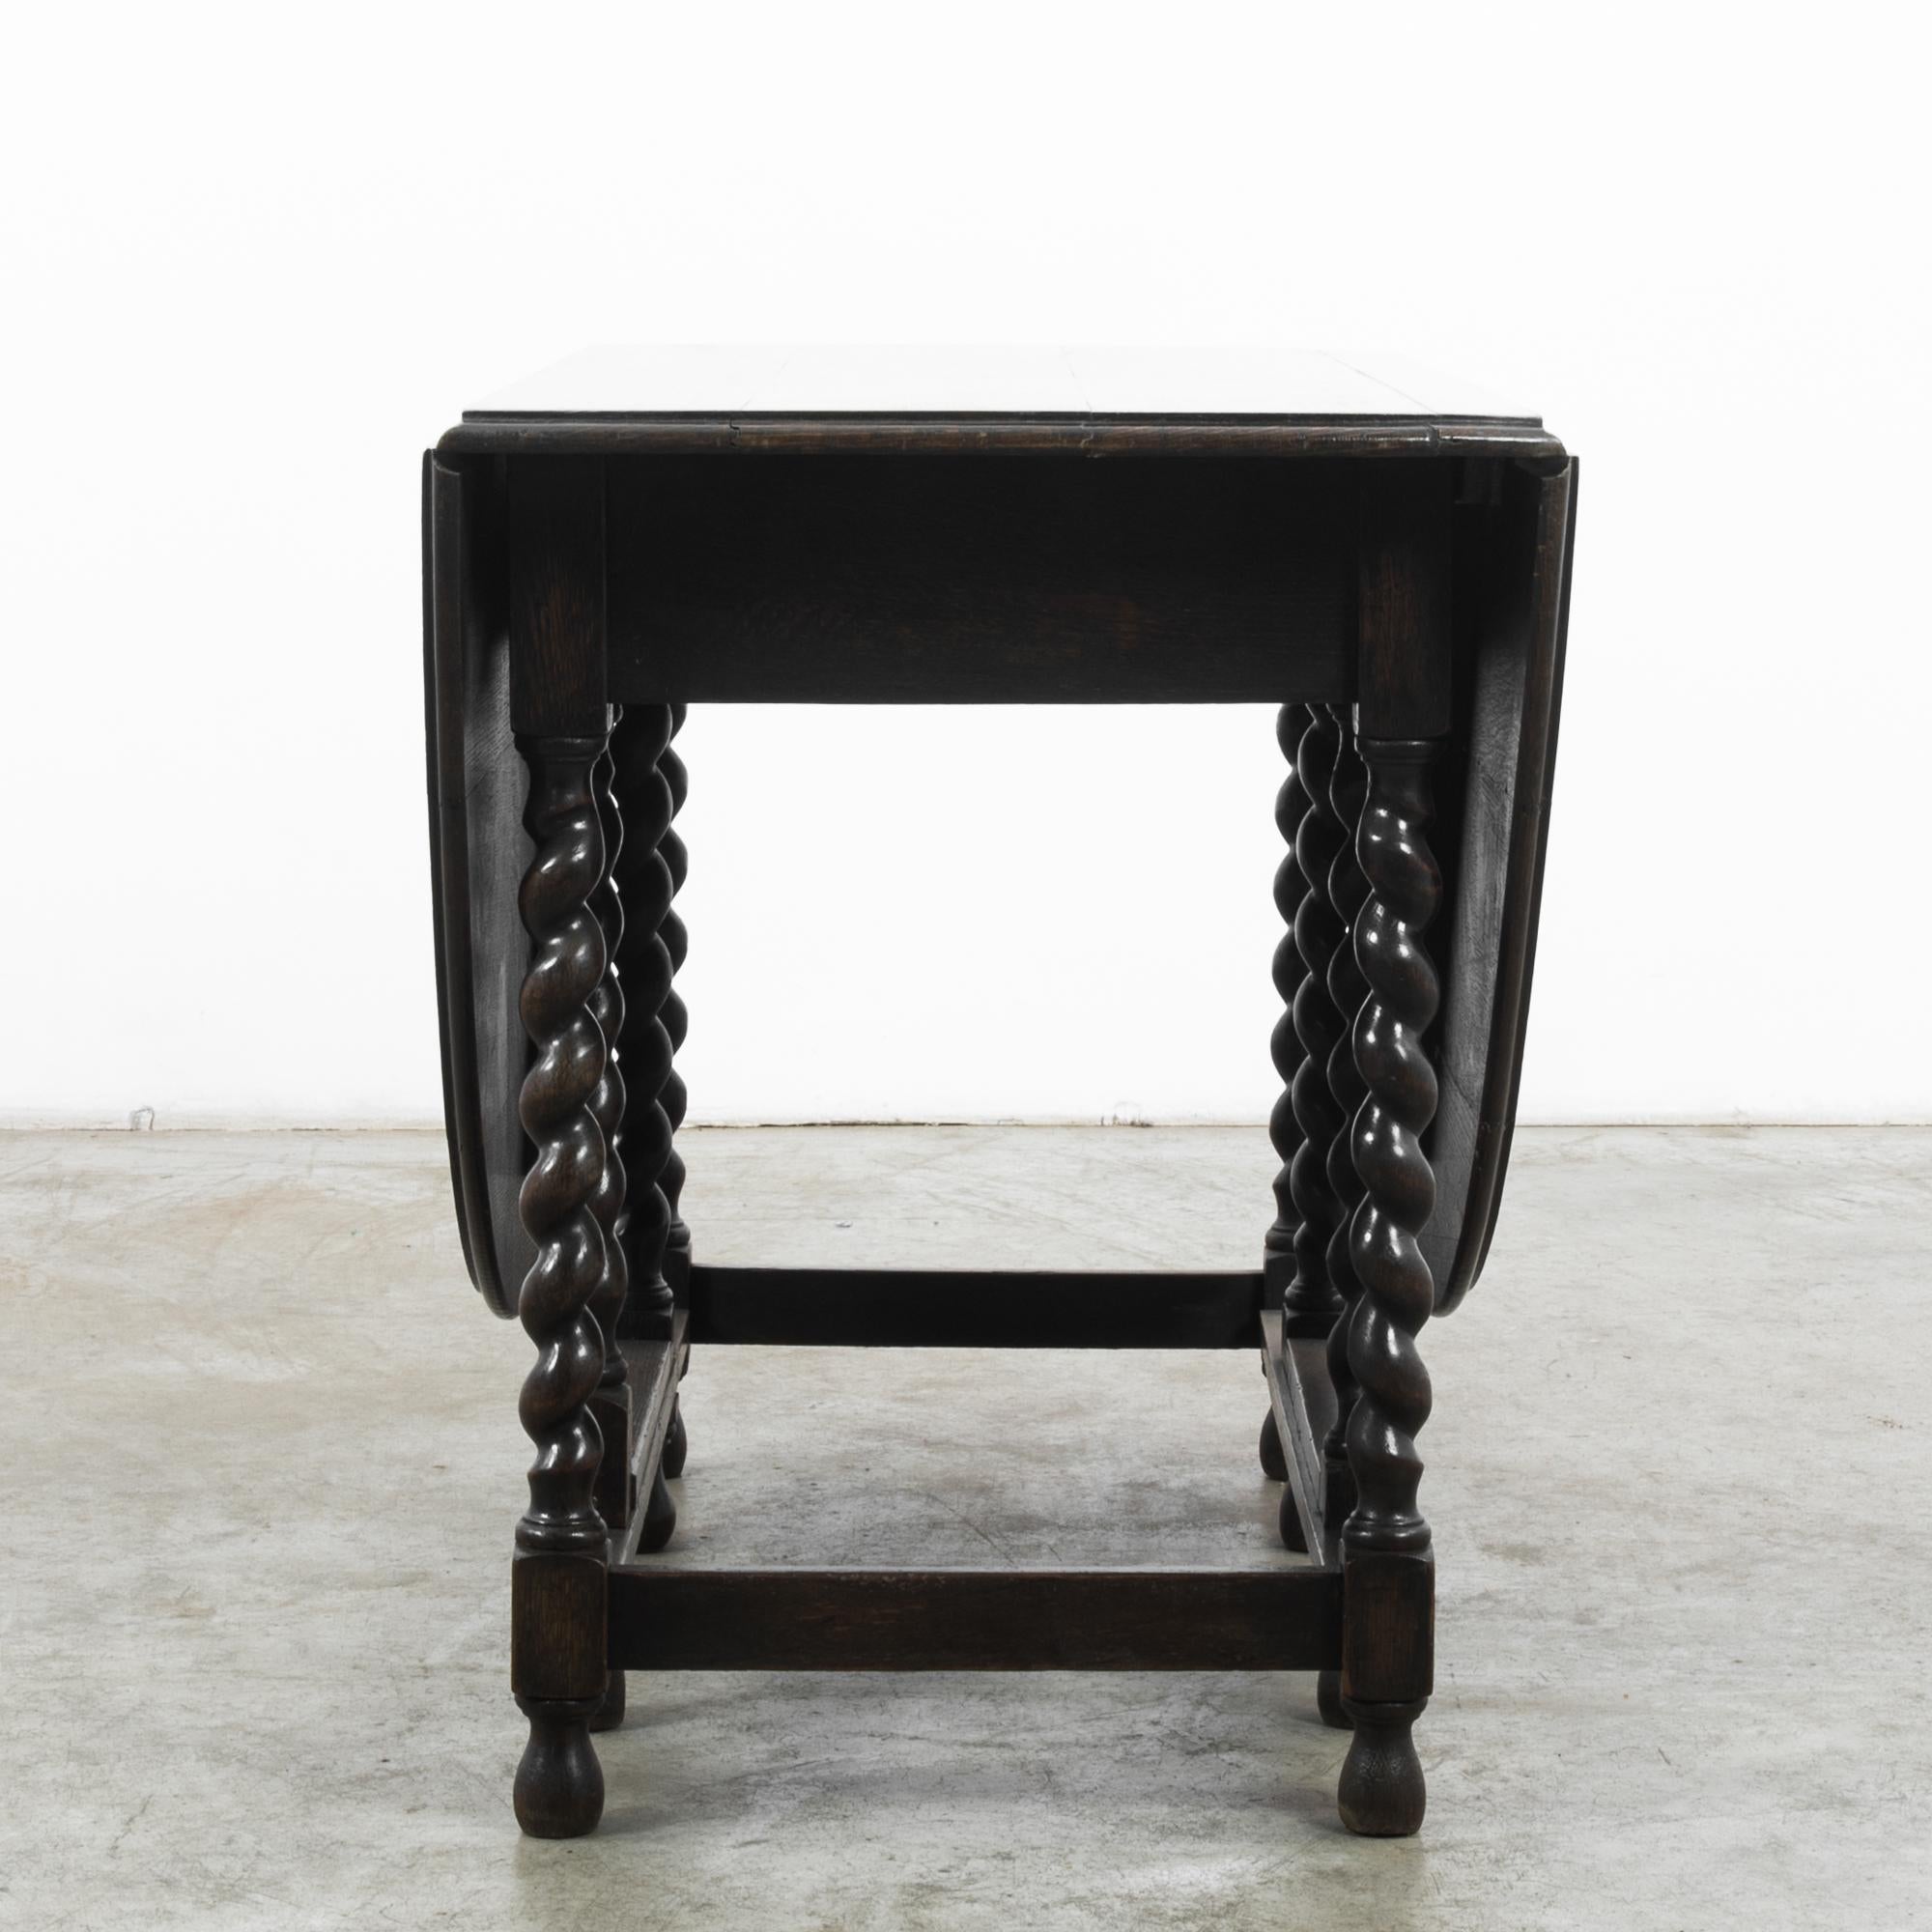 This antique gateleg table was made in the United Kingdom. The striking barley twist legs give it a stately, old-world charm. It features a rich, deep tone, polished to highlight the elegant wood swirls on the tabletop. The sides of the circular